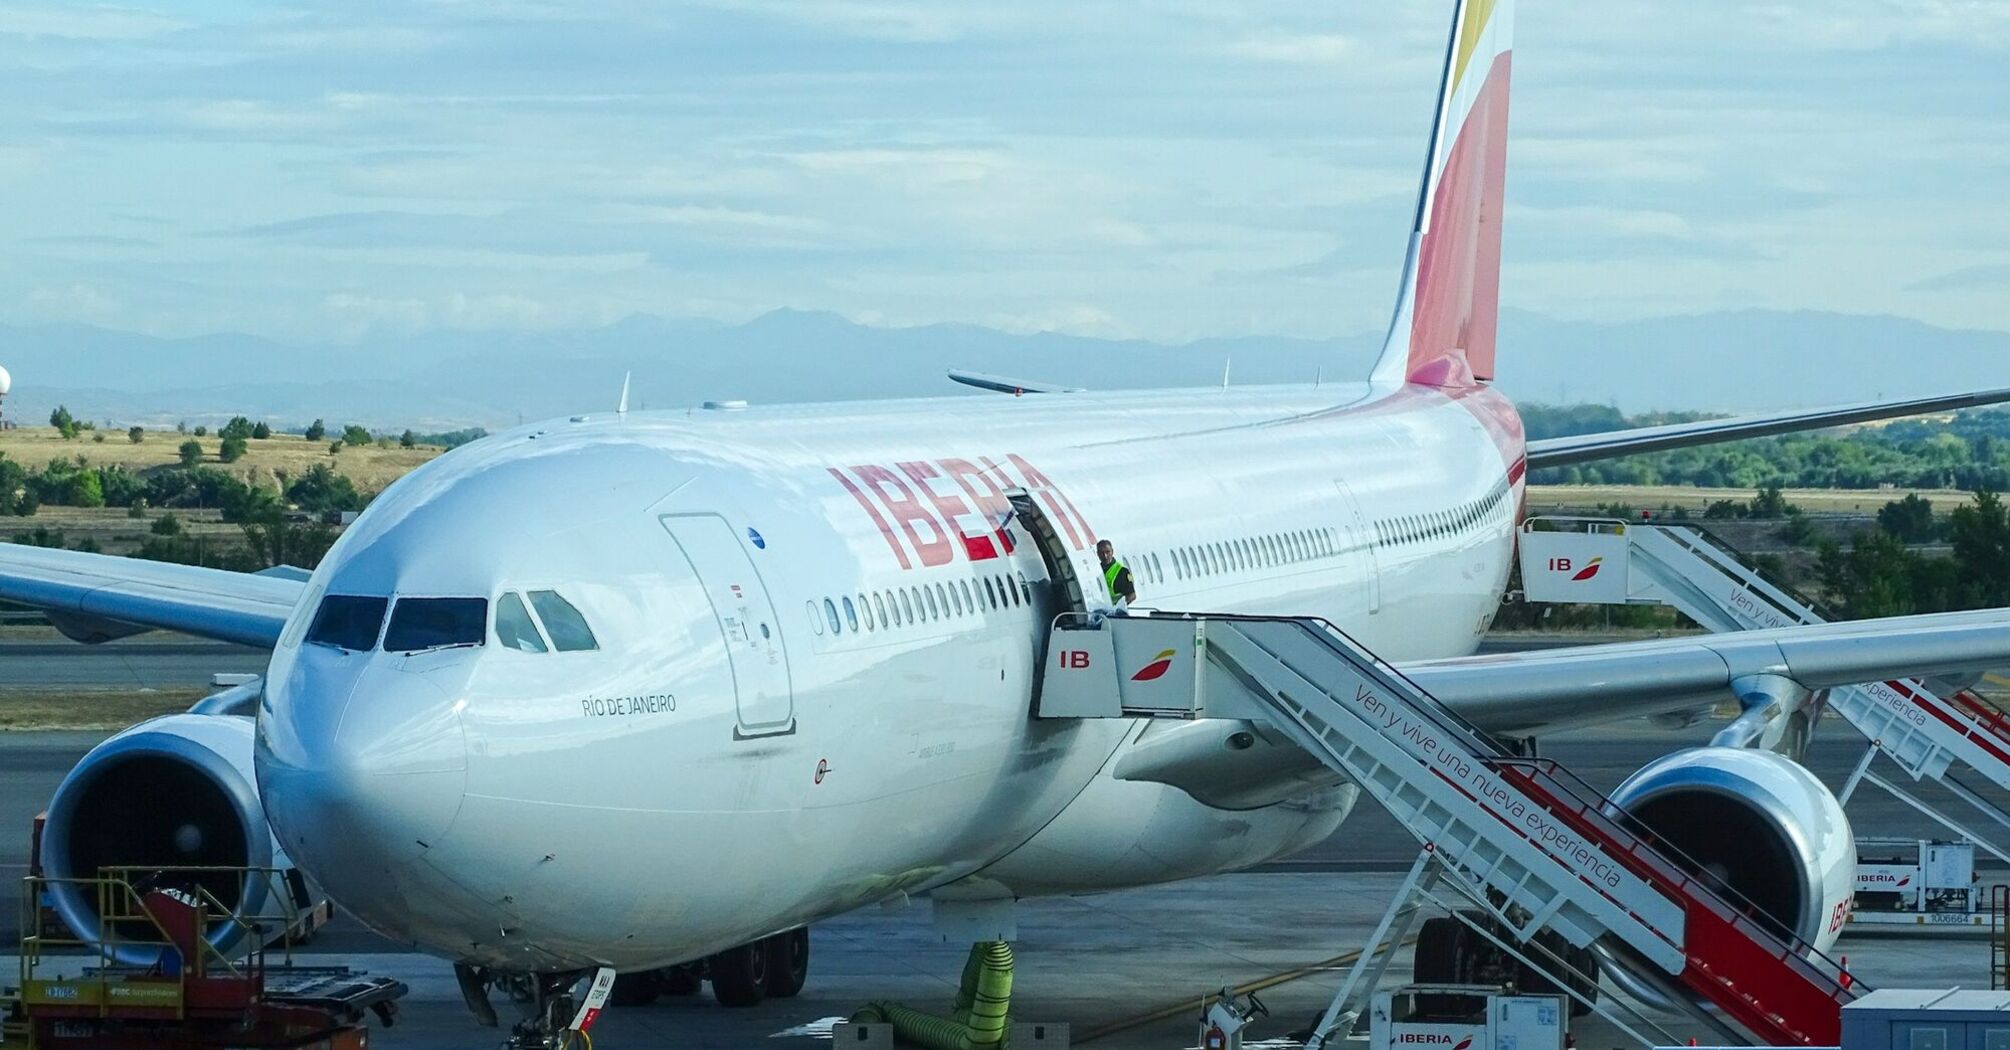 Iberia aircraft at the airport gate